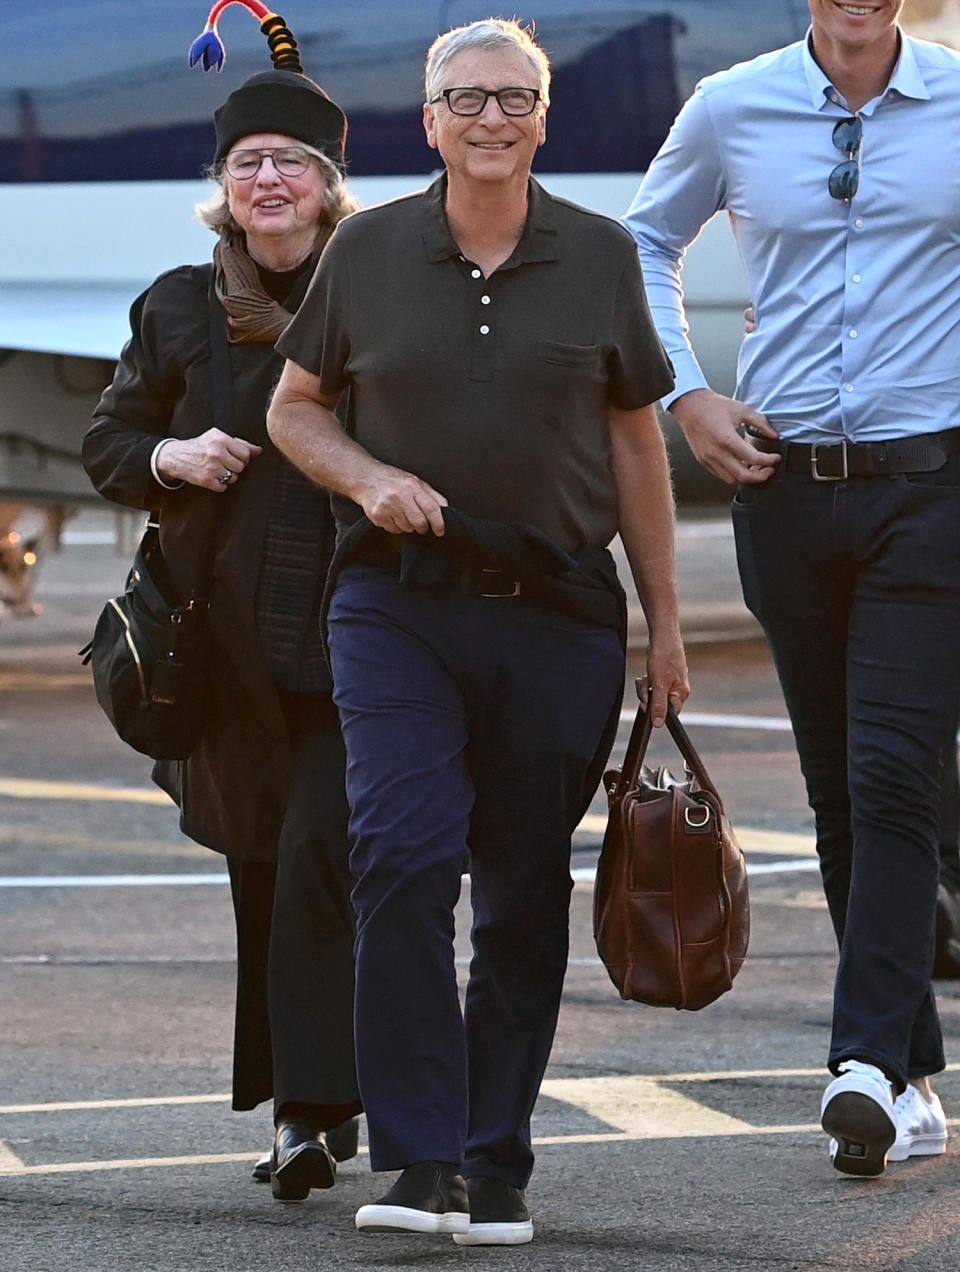 <p>On Oct. 14, the father of the bride, Bill Gates, was seen arriving in New York City, stepping off a helicopter alongside family members. </p>